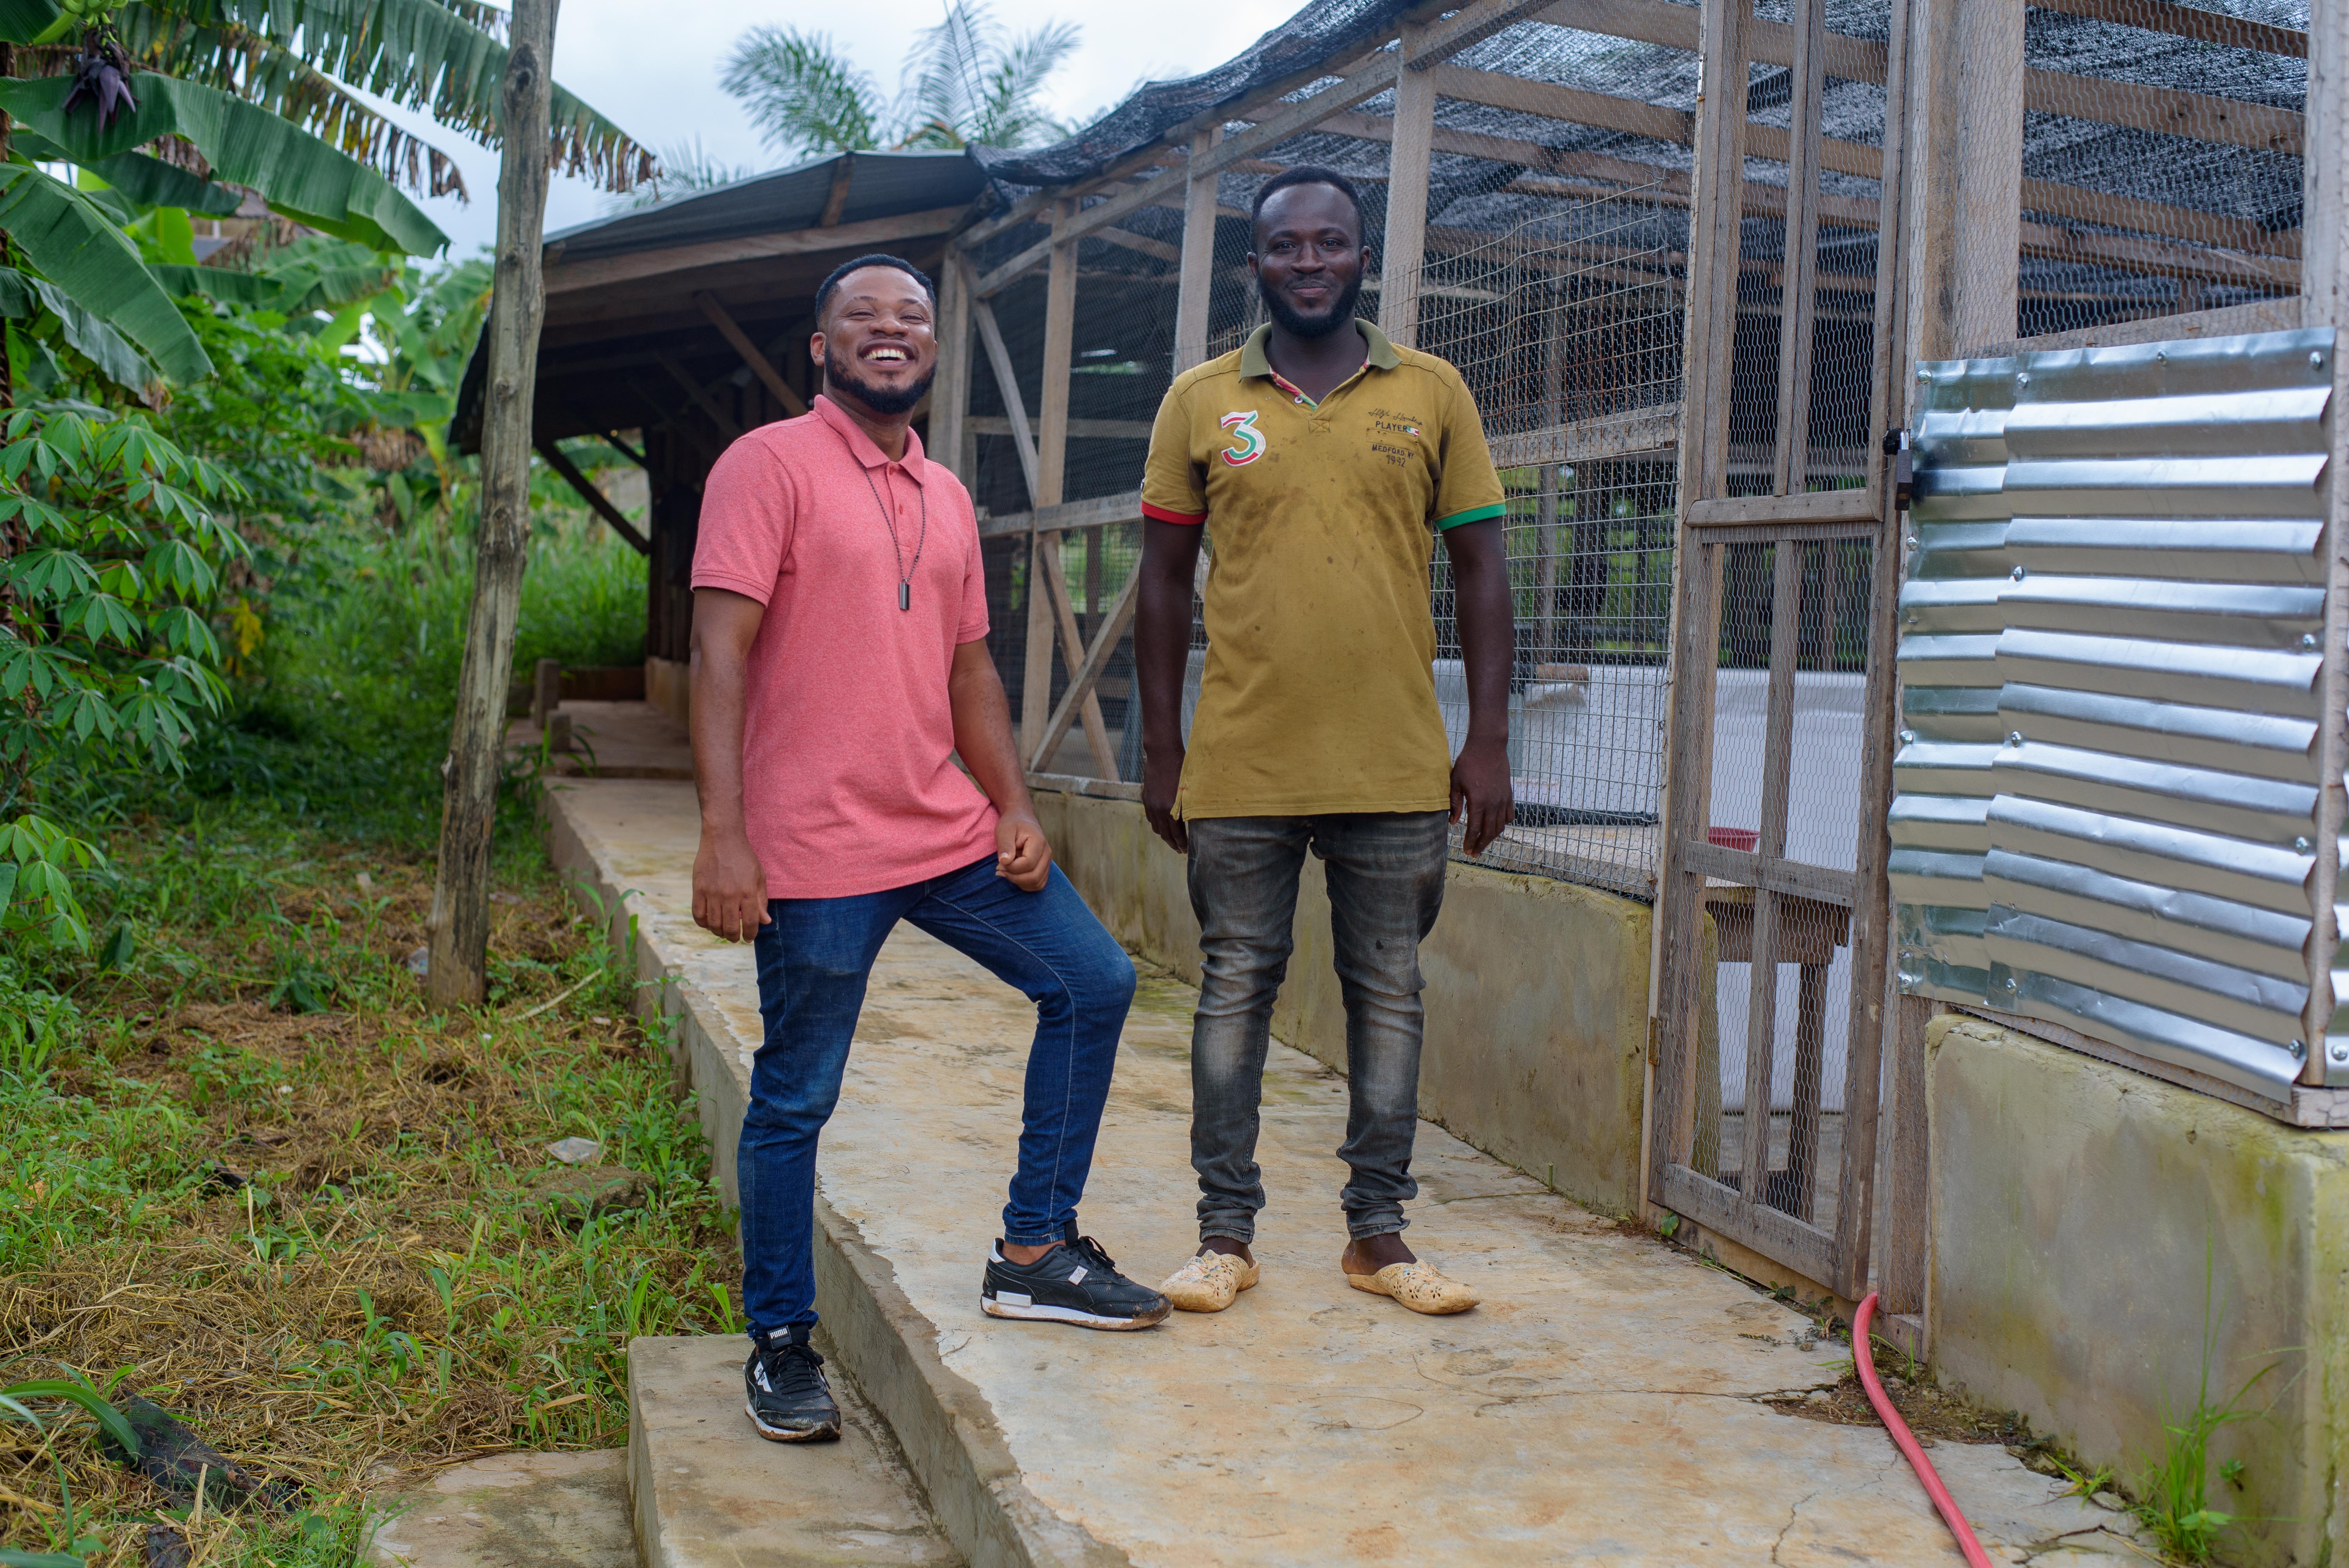 Kwasi Bame Anokye stands in front of his snail farm together with his employee